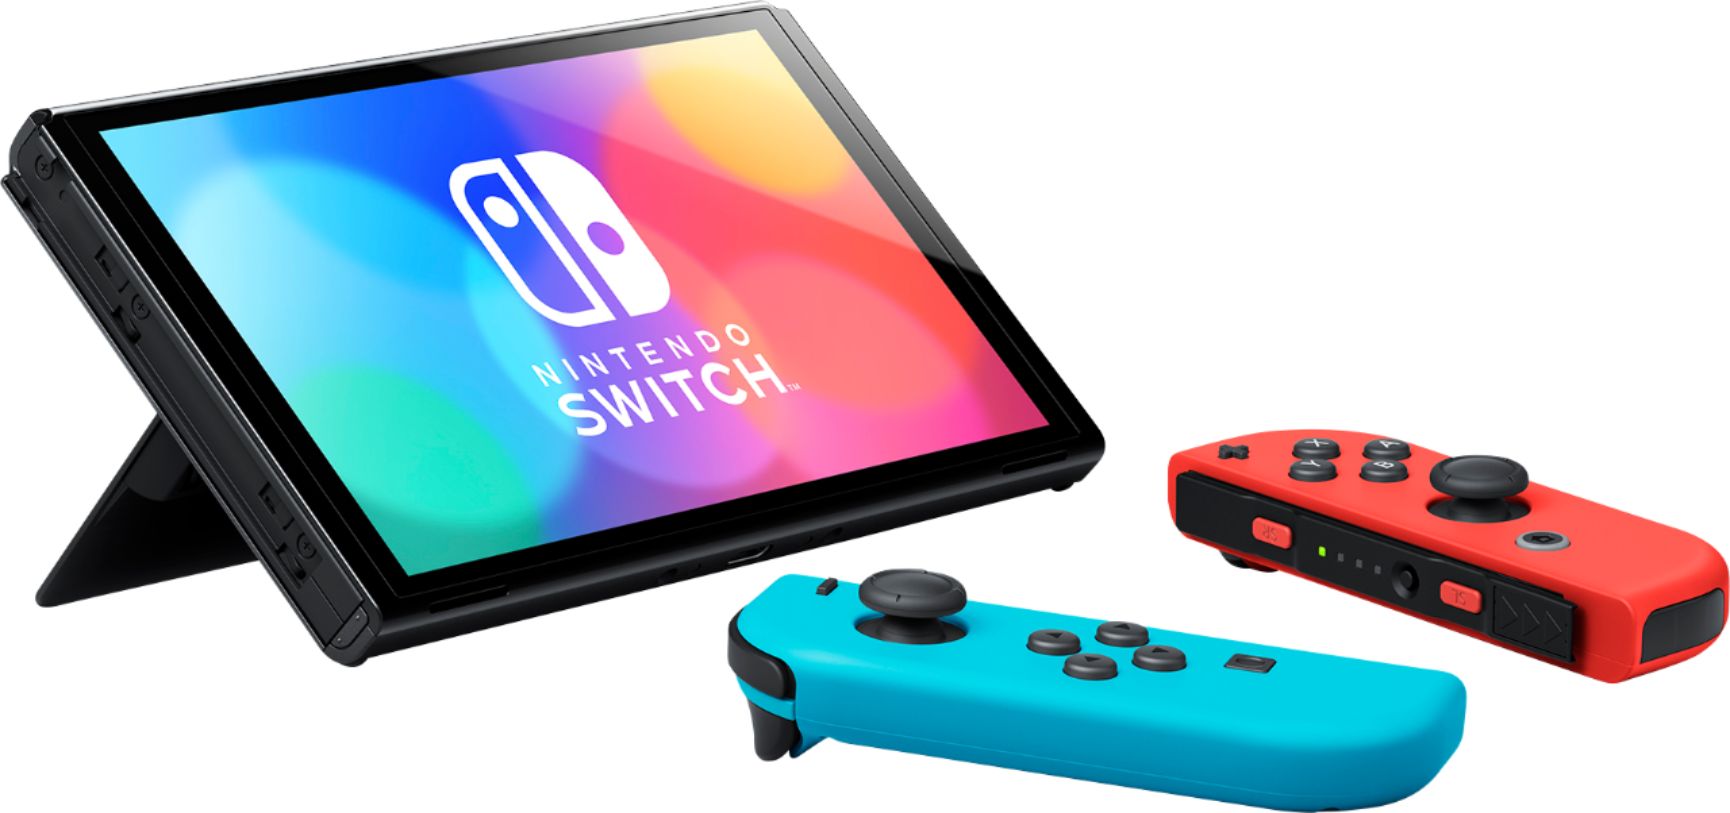 2022 New Nintendo Switch OLED Model Neon Red Blue with Hyrule Warriors: Age of Calamity and Mytrix Full Body Skin Sticker for NS OLED Console, Dock and Joycons - Sakura Pink